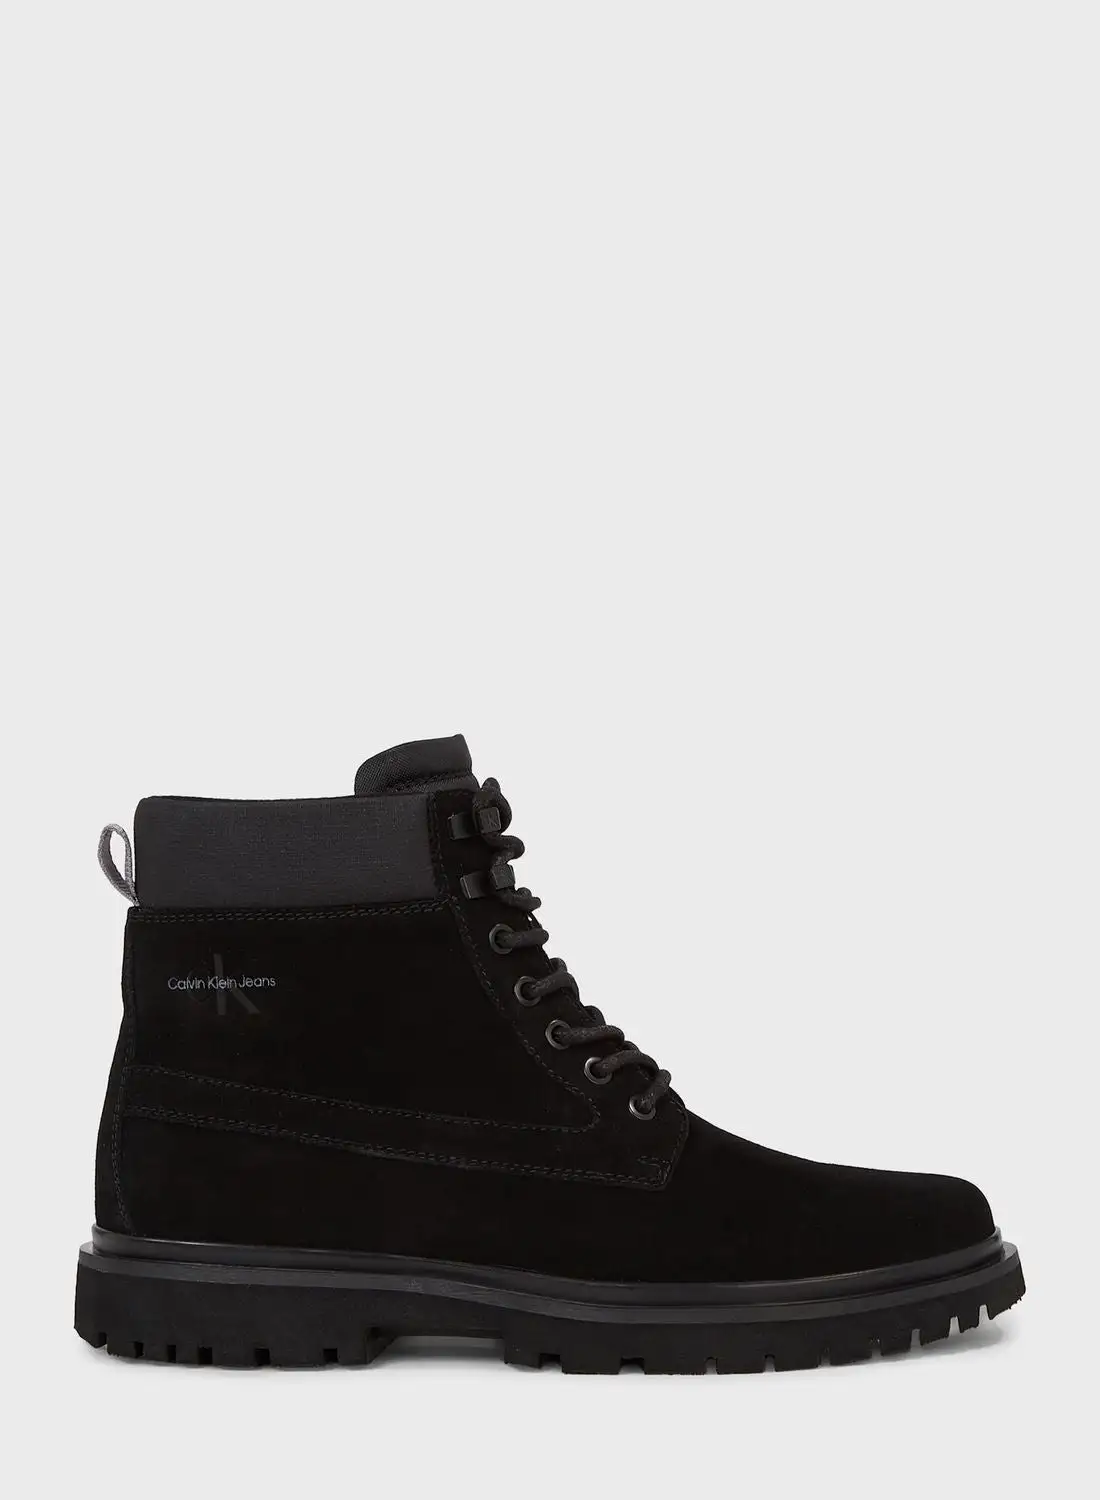 Calvin Klein Jeans High Top Lace Up Sneakers